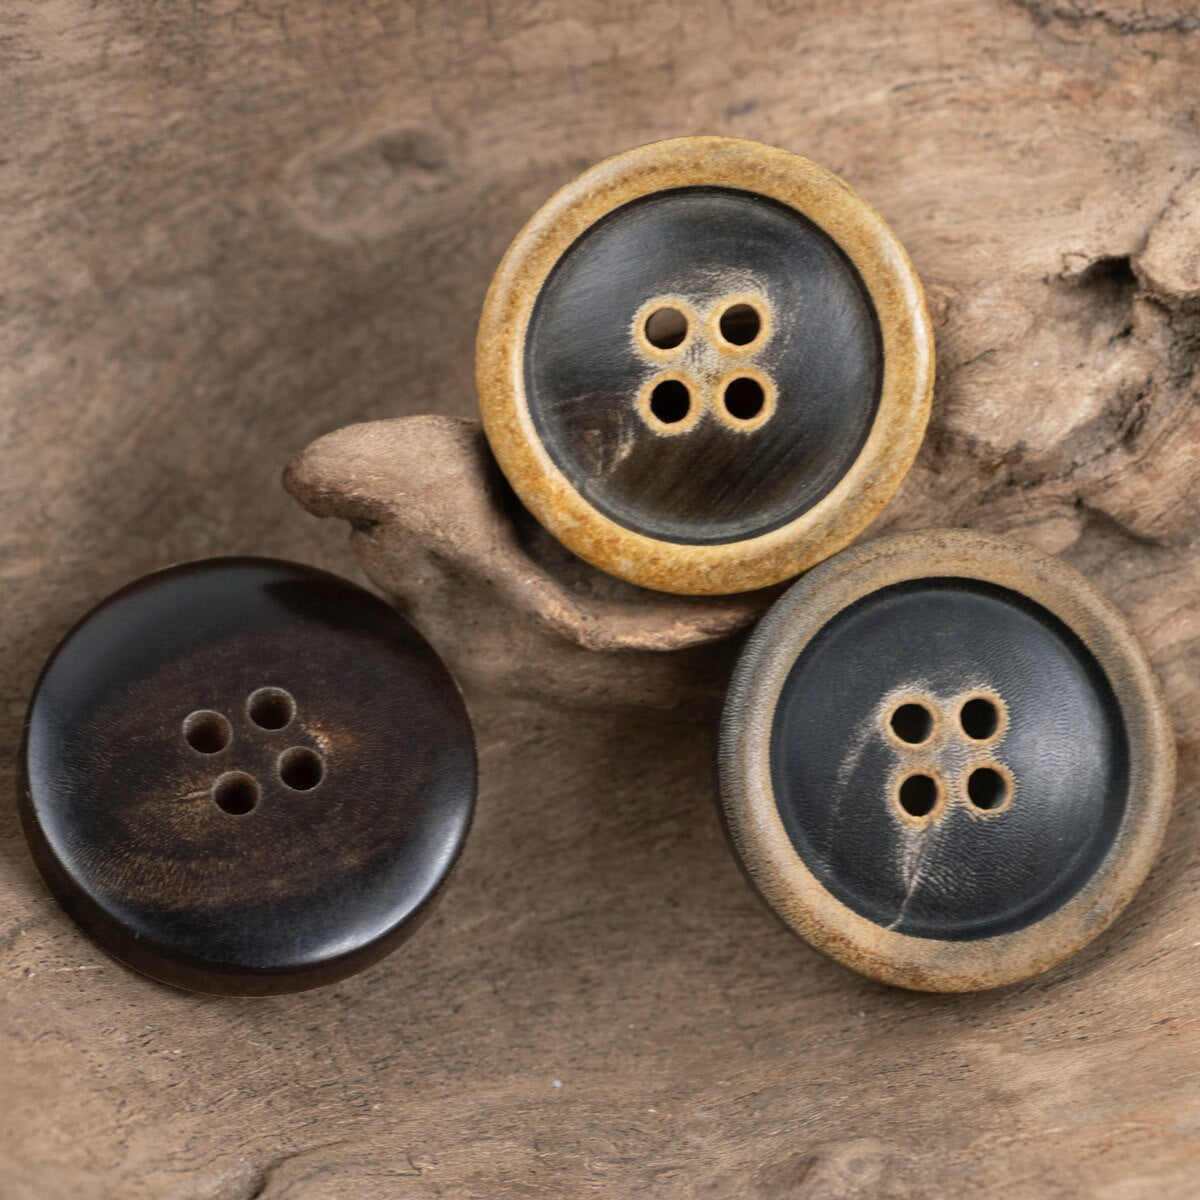 6pcs Round Rim Dark Brown Horn Buttons Scorched Retro Autumn Winter Leather Coat Large Buttons